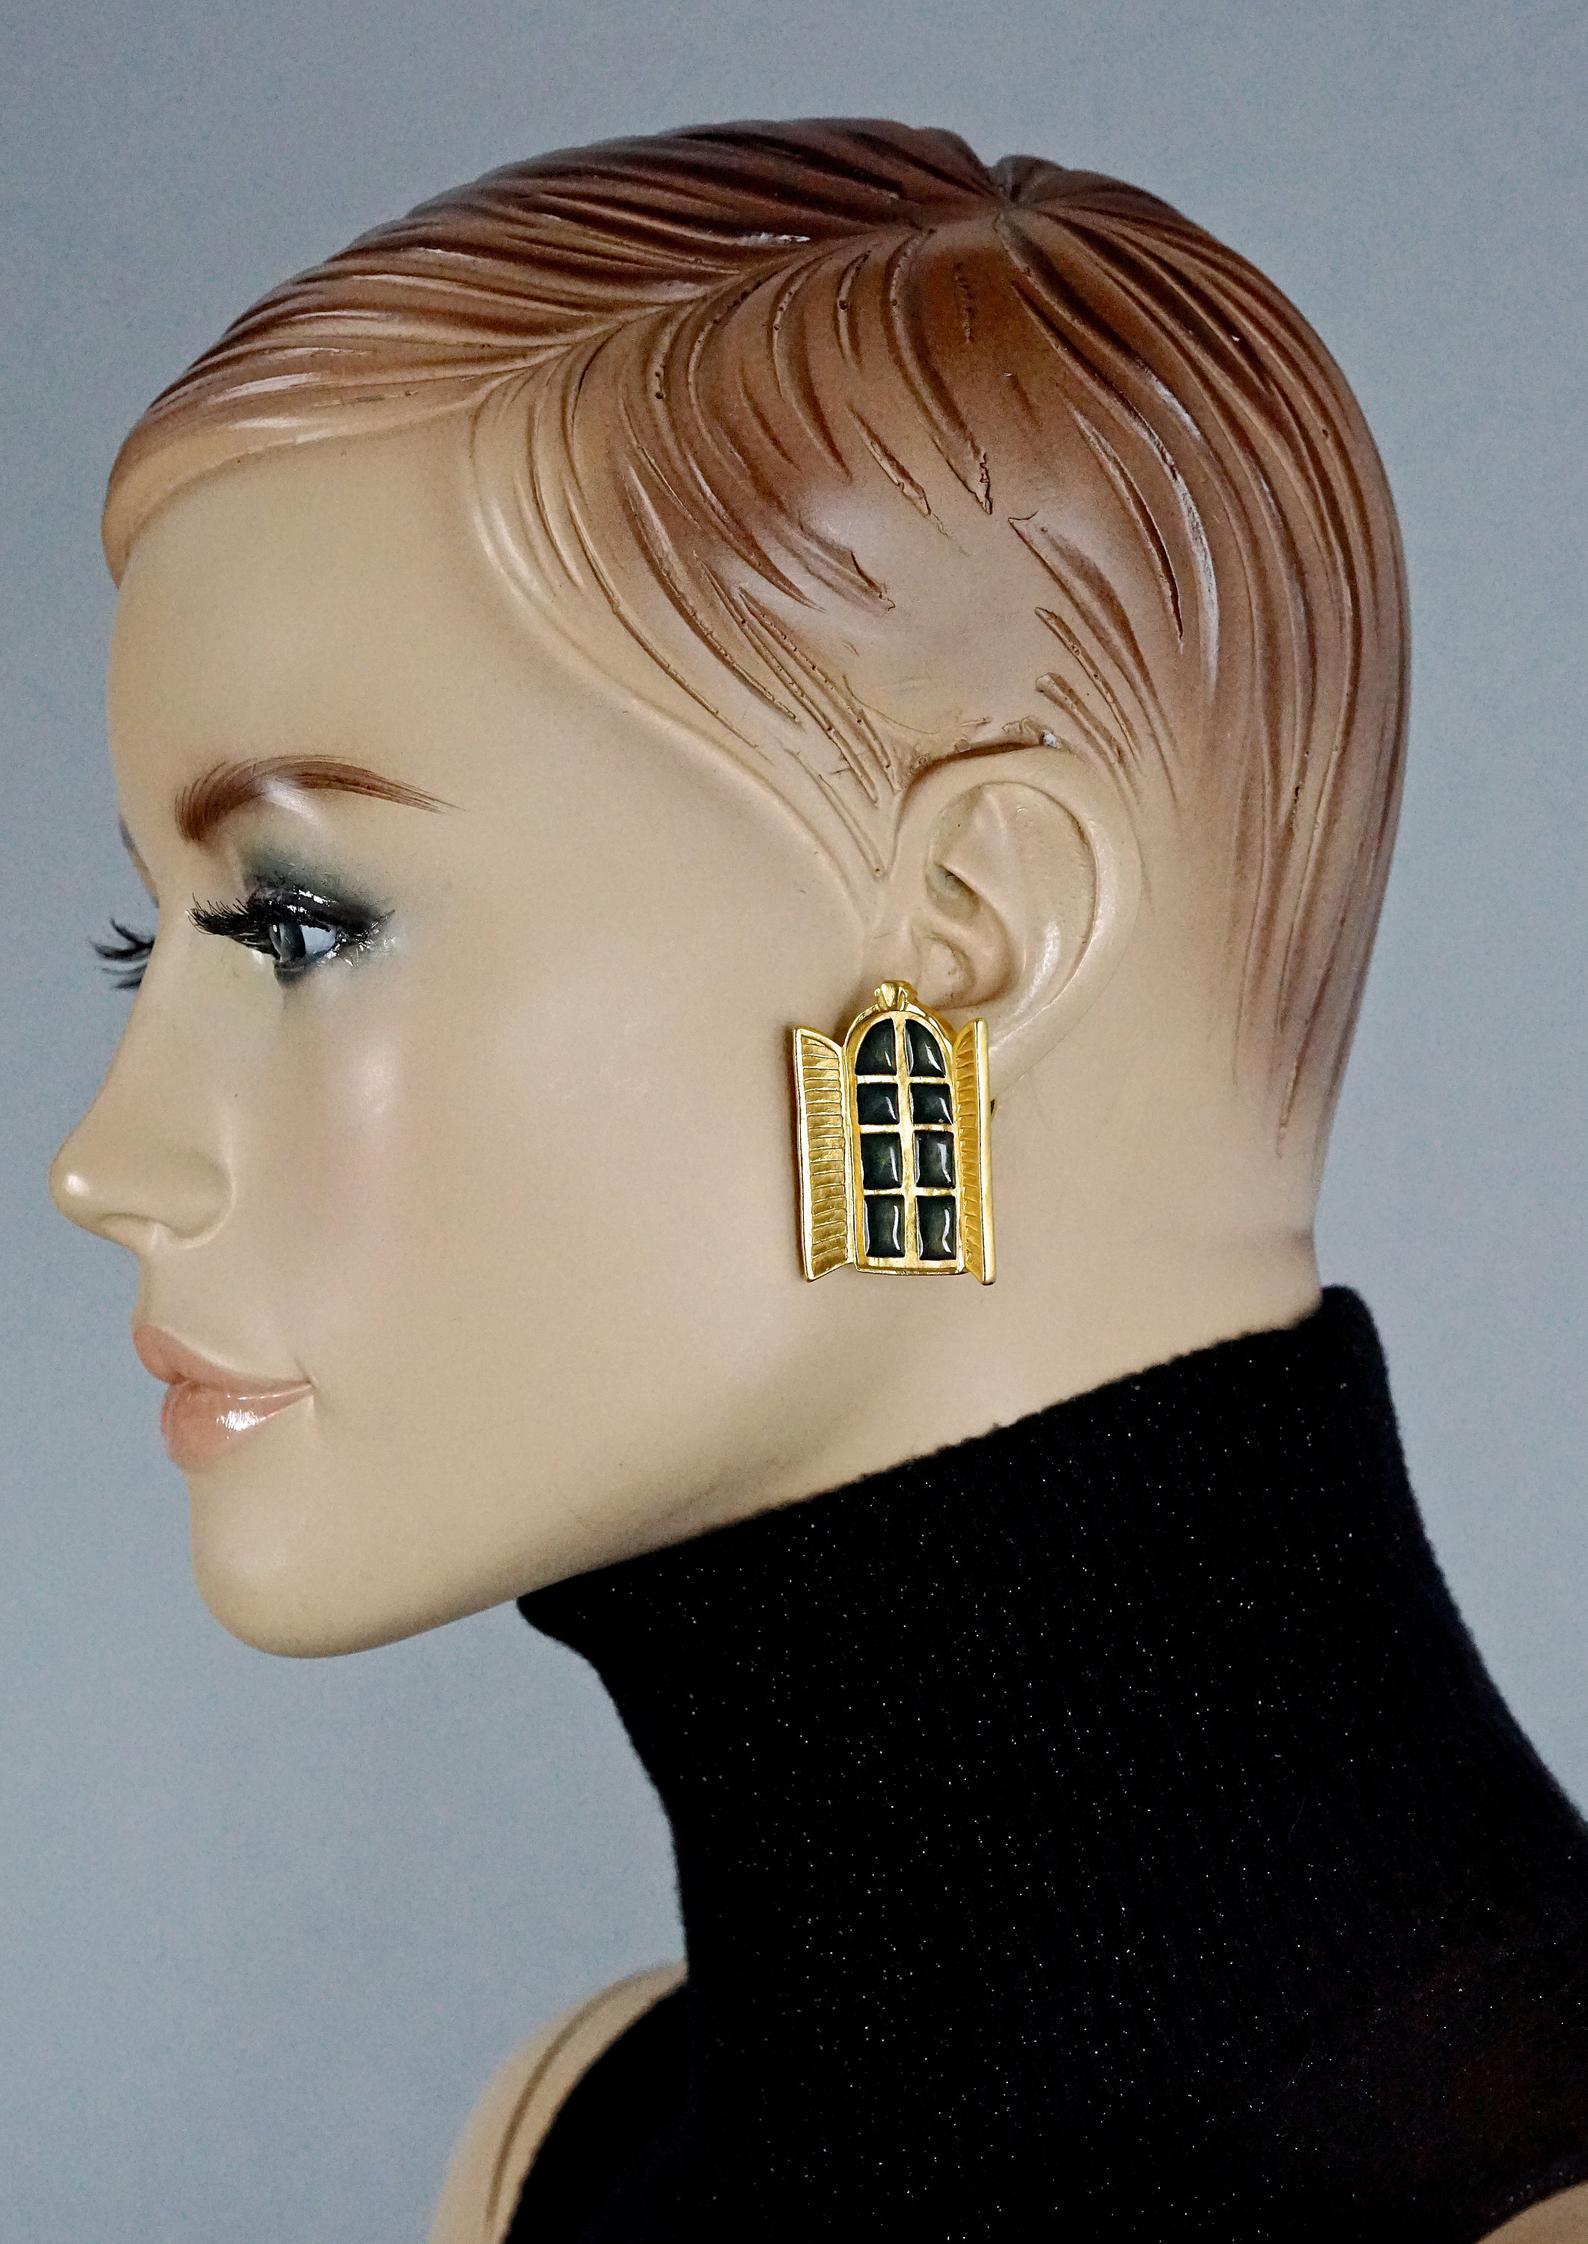 Vintage KARL LAGERFELD French Window Enamel Earrings

Measurements:
Height: 1.53 inches (3.9 cm)
Width: 1.10 inches (2.8 cm)
Weight per Earring: 17 grams

Features:
- 100% Authentic KARL LAGERFELD.
- Detailed French window in open position.
- Black